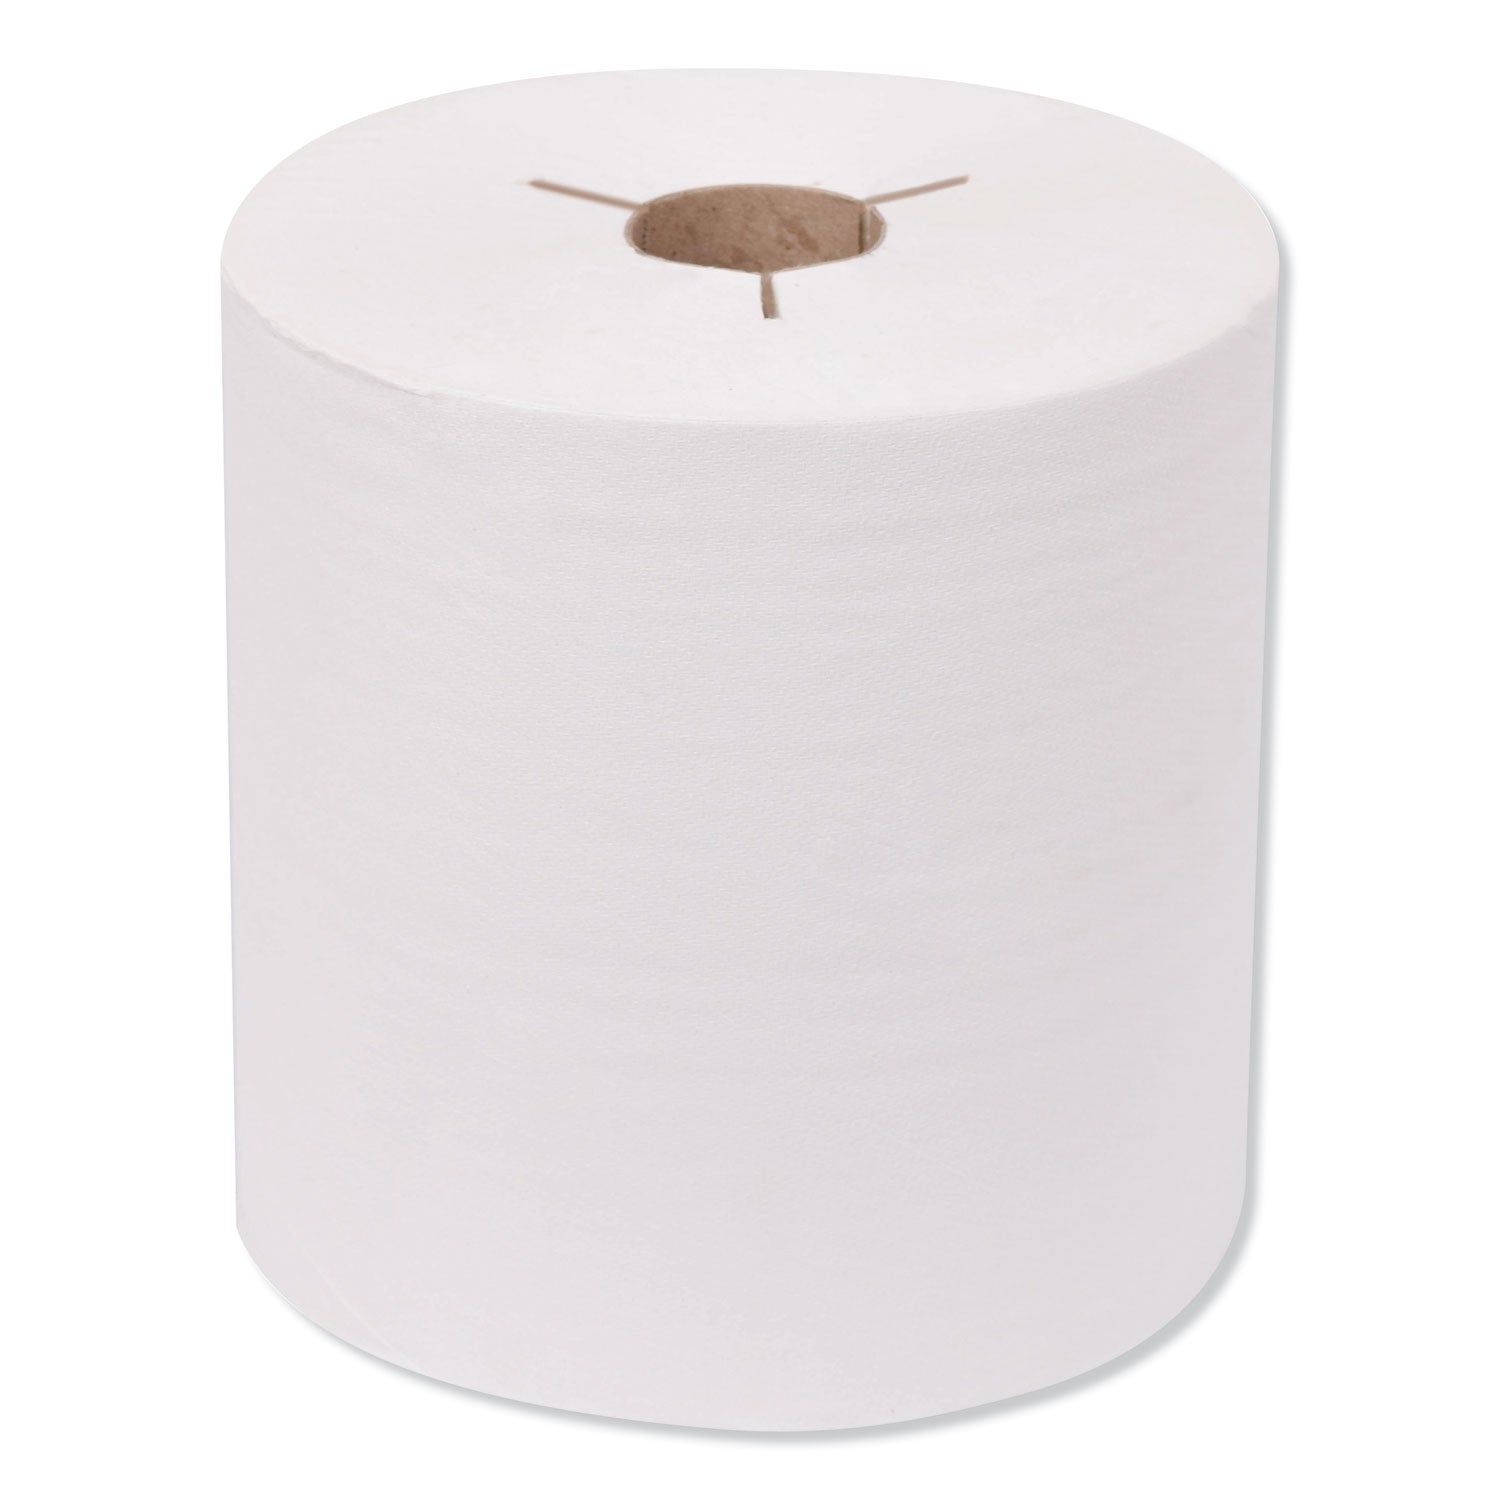 premium-hand-towel-roll-notched-1-ply-8-x-600-ft-white-720-sheets-roll-6-rolls-carton_trk8030630 - 1